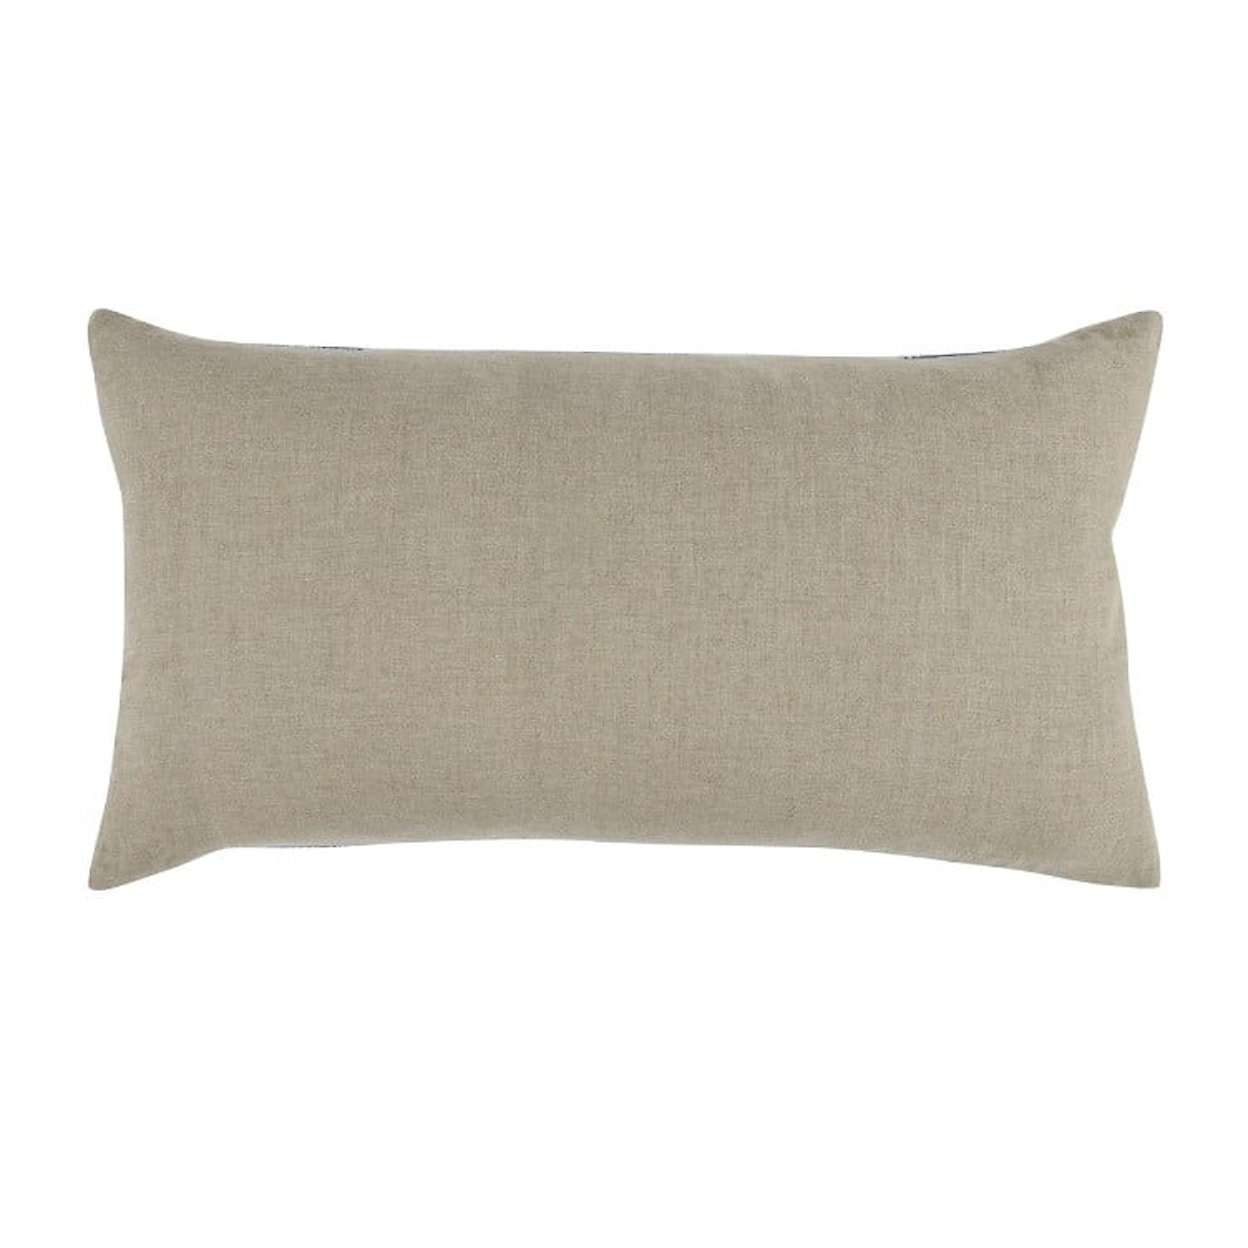 Classic Home Pillows AD LINCOLN IVORY/BLUE 14X26